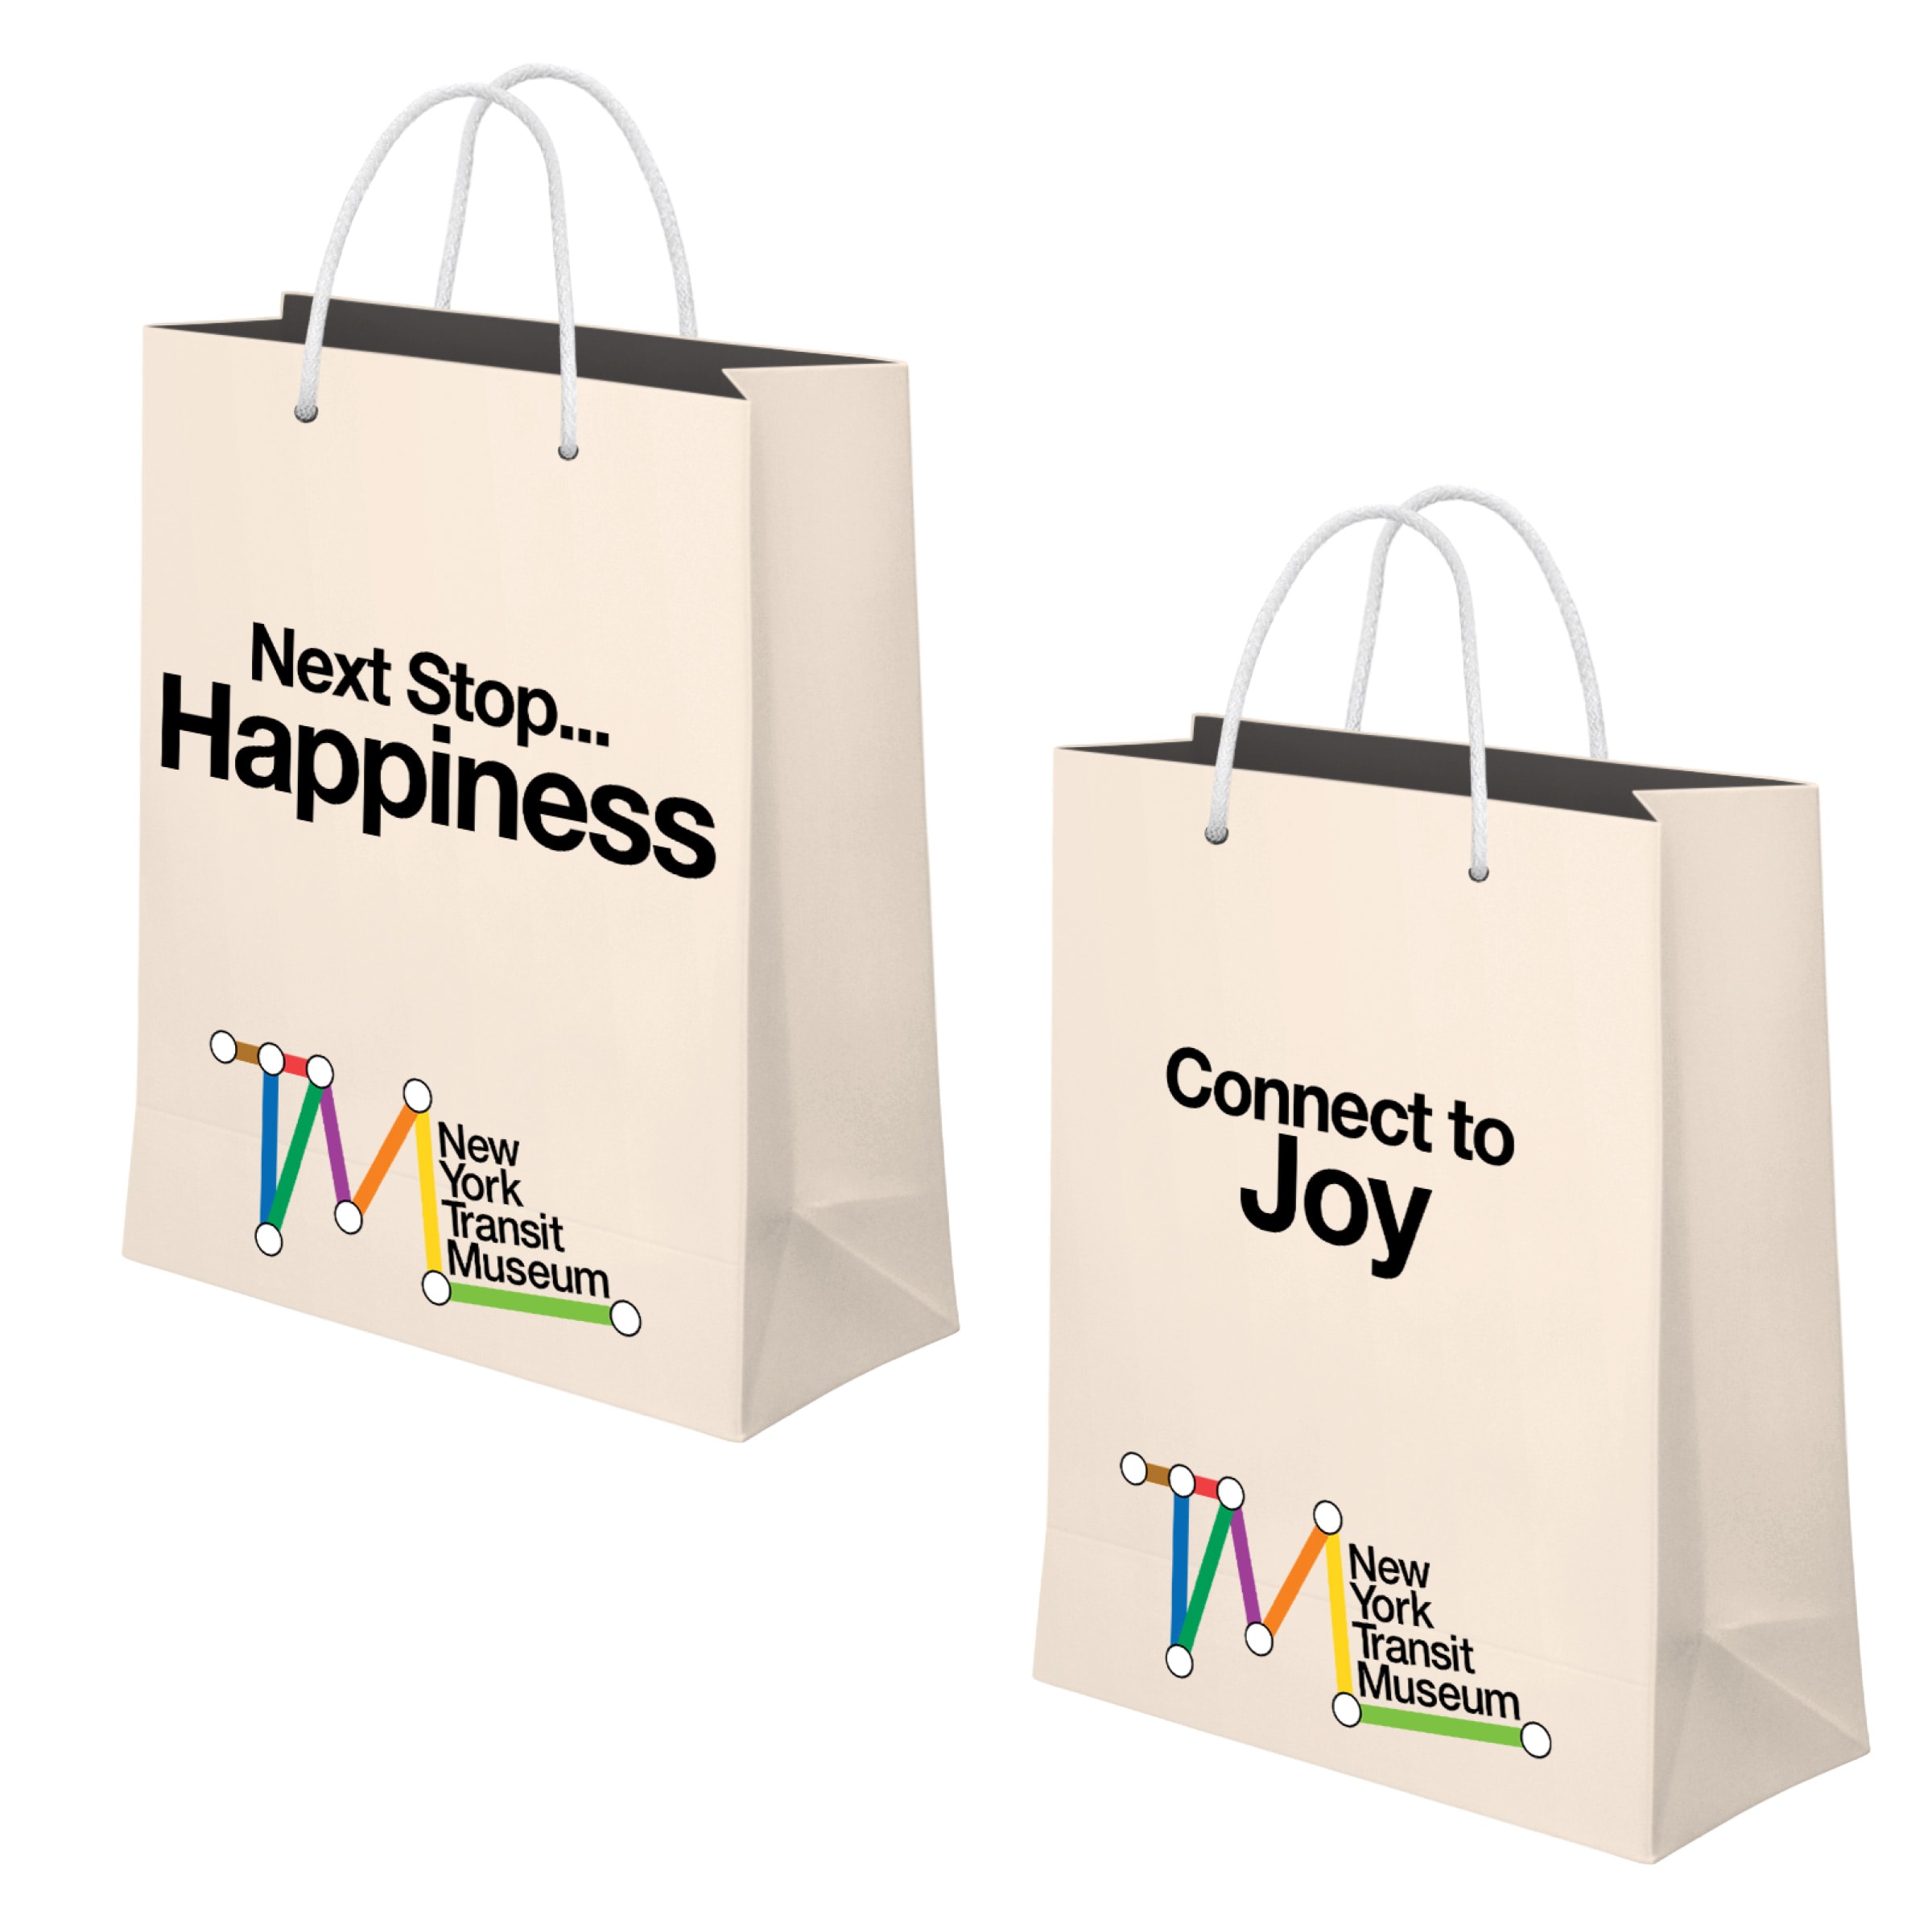 Mockup of two tan colored shopping bags. One bag says, Next Stop... Happiness, while the other says, Connect to Joy